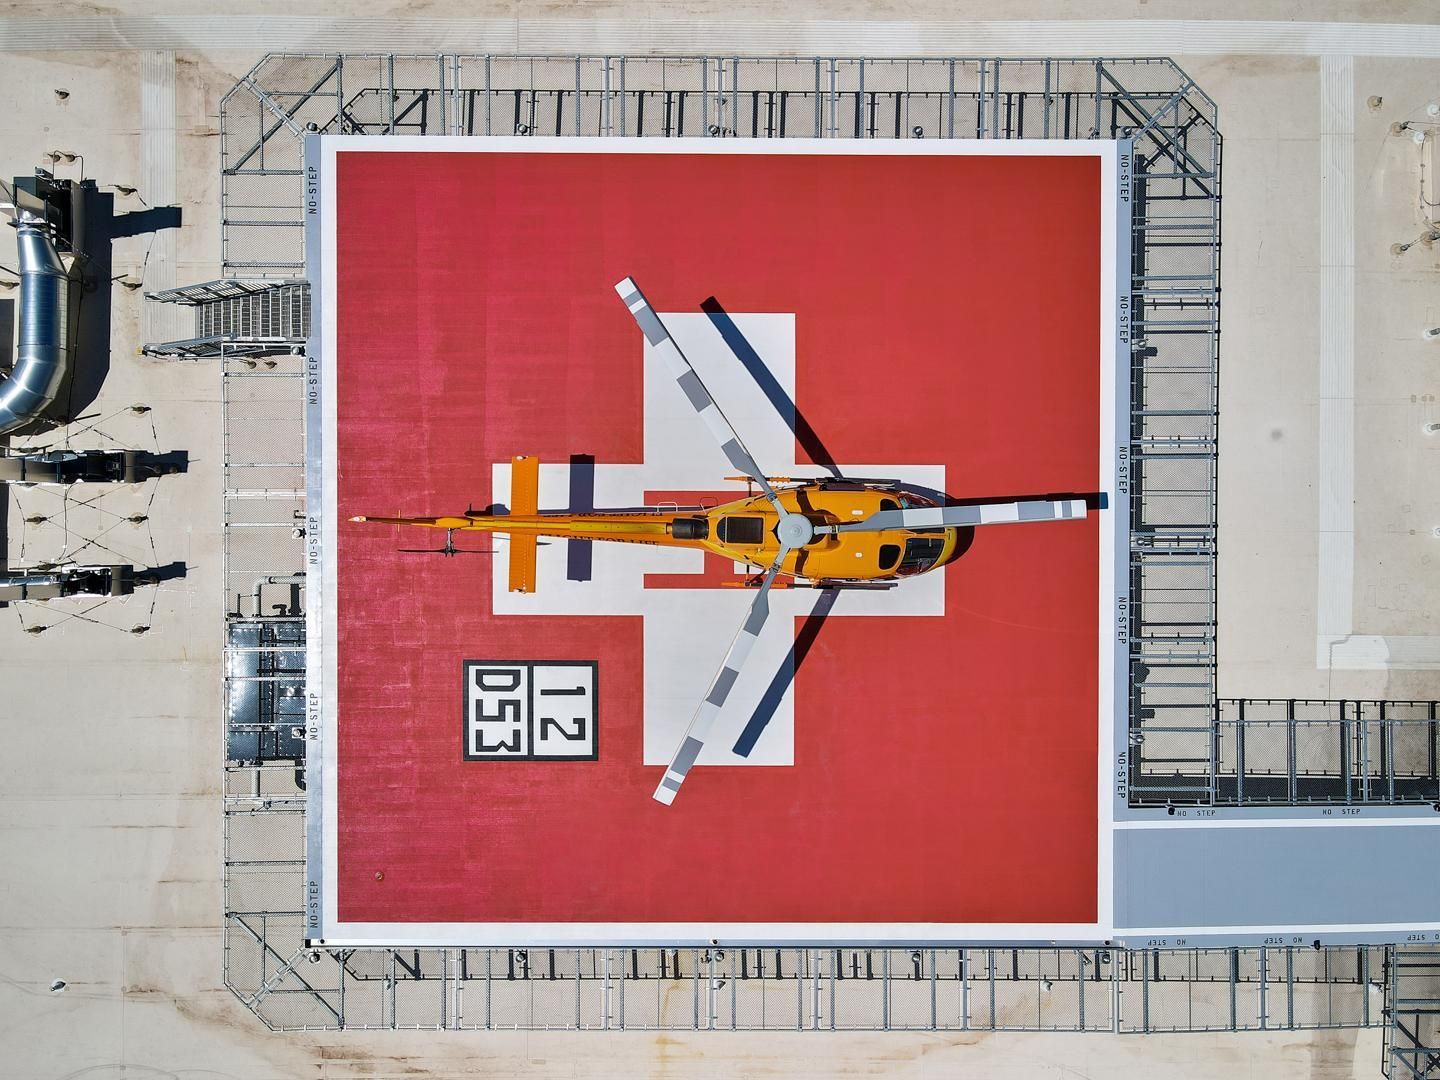 Helipad with copter 2